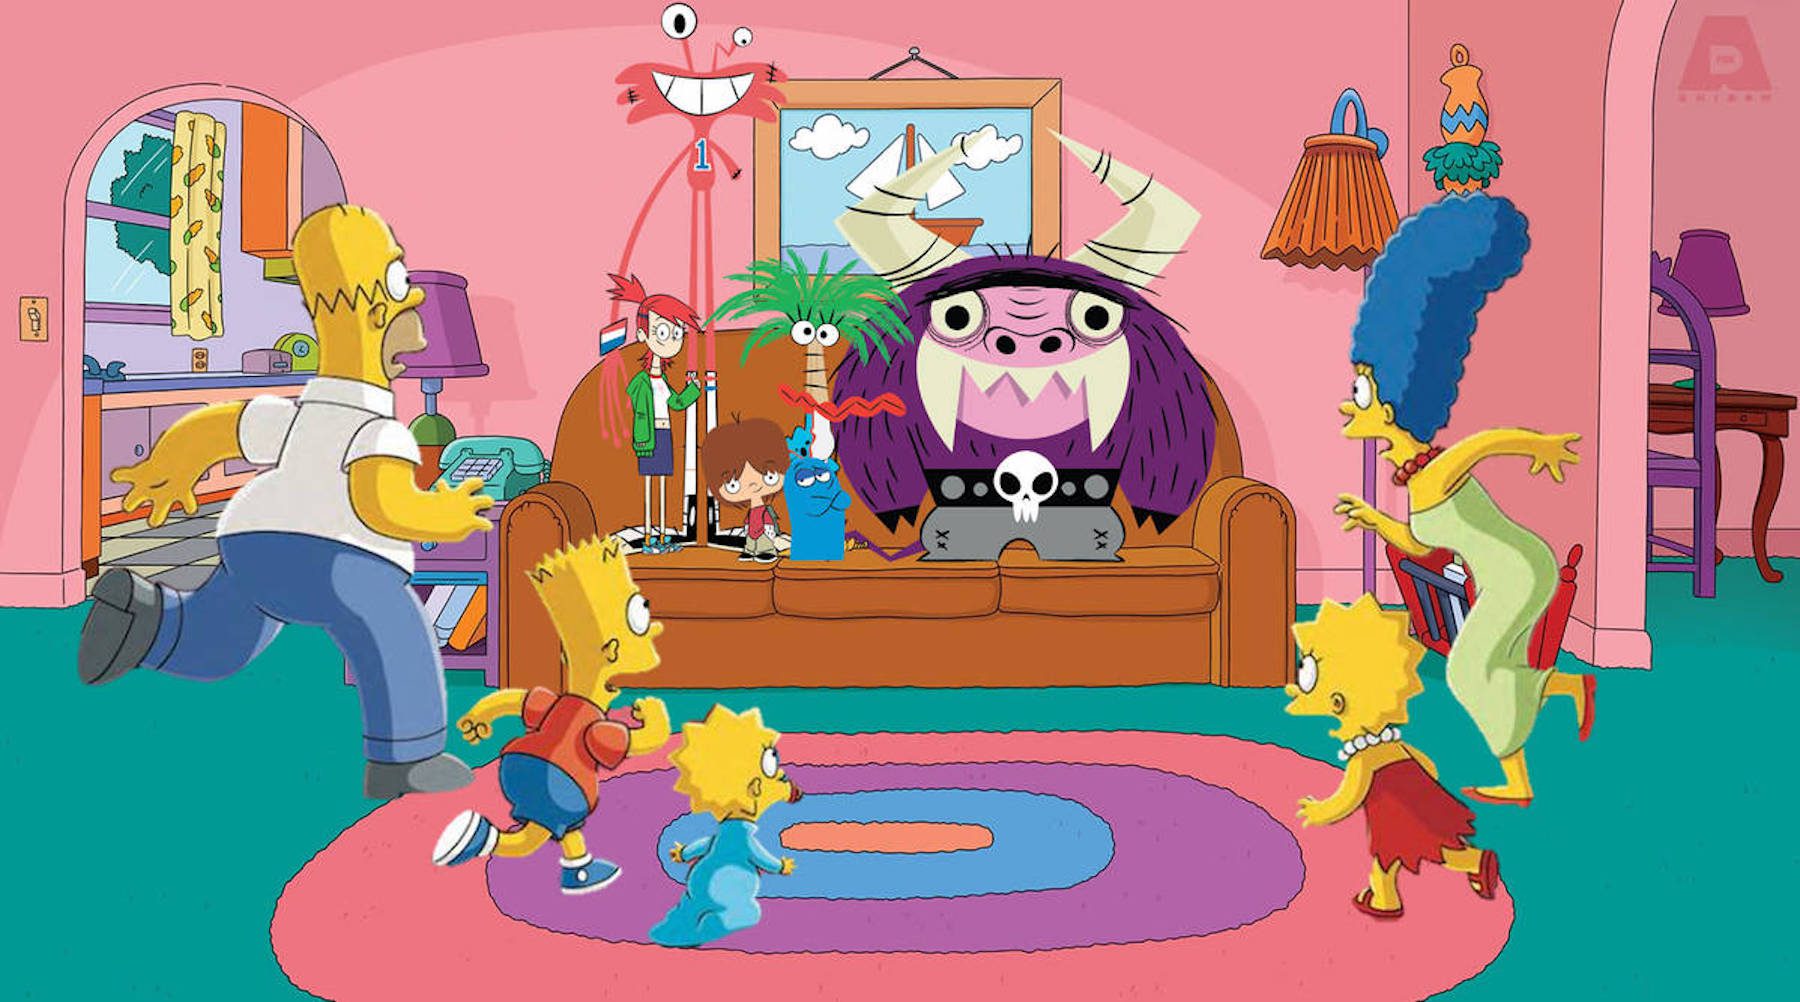 A Simpsons couch gag with the family discovering characters from Foster's Home for Imaginary Friends in their place.